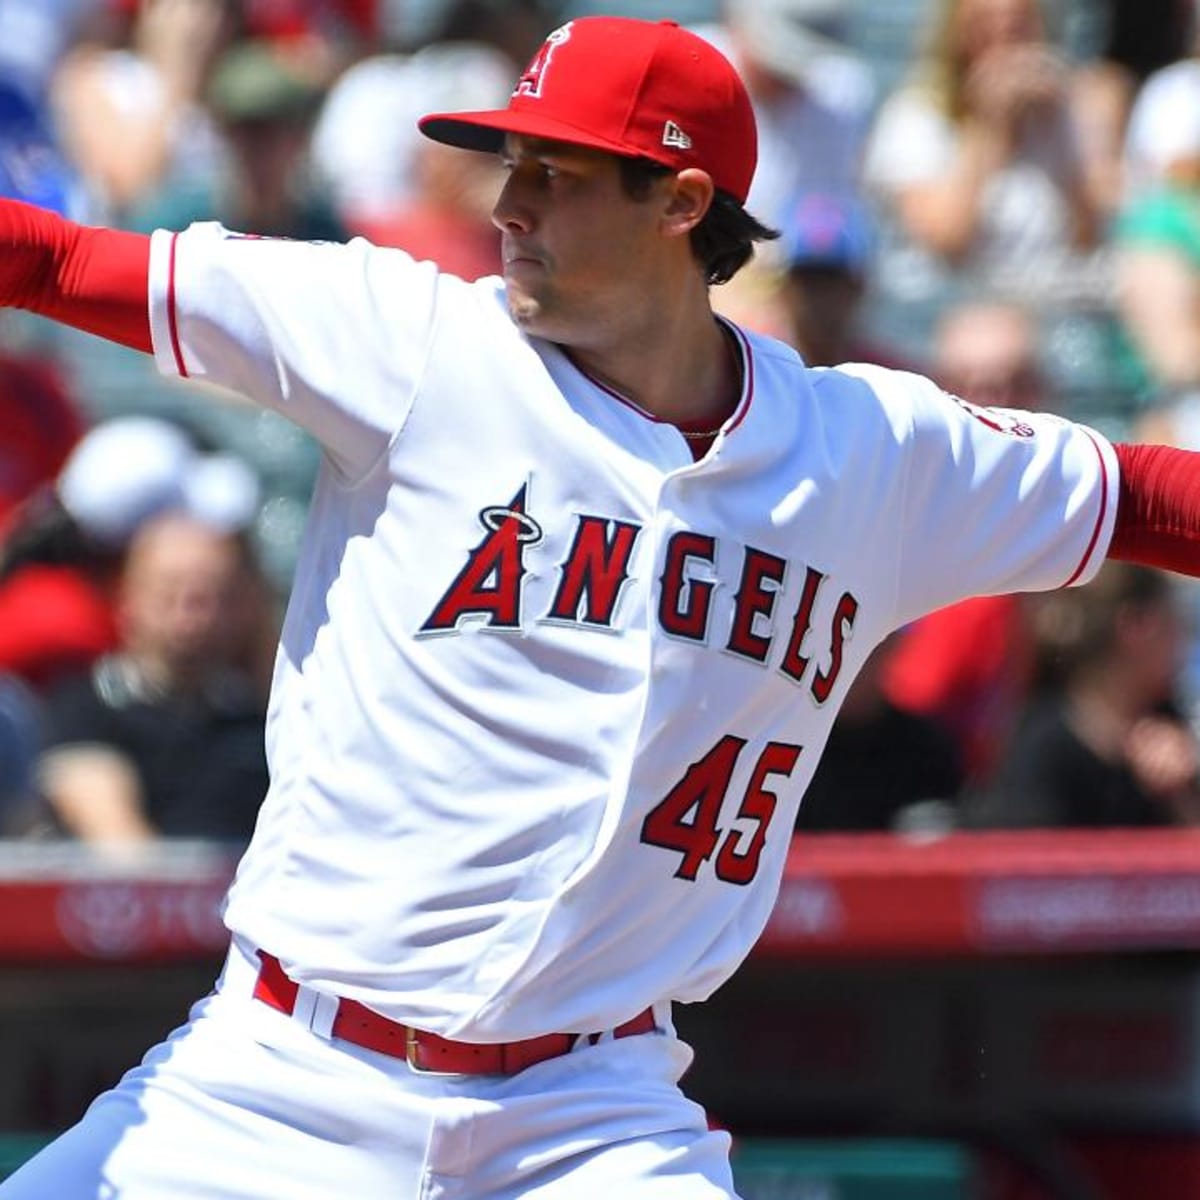 Los Angeles Angels pitcher Tyler Skaggs dead at 27; found in hotel room